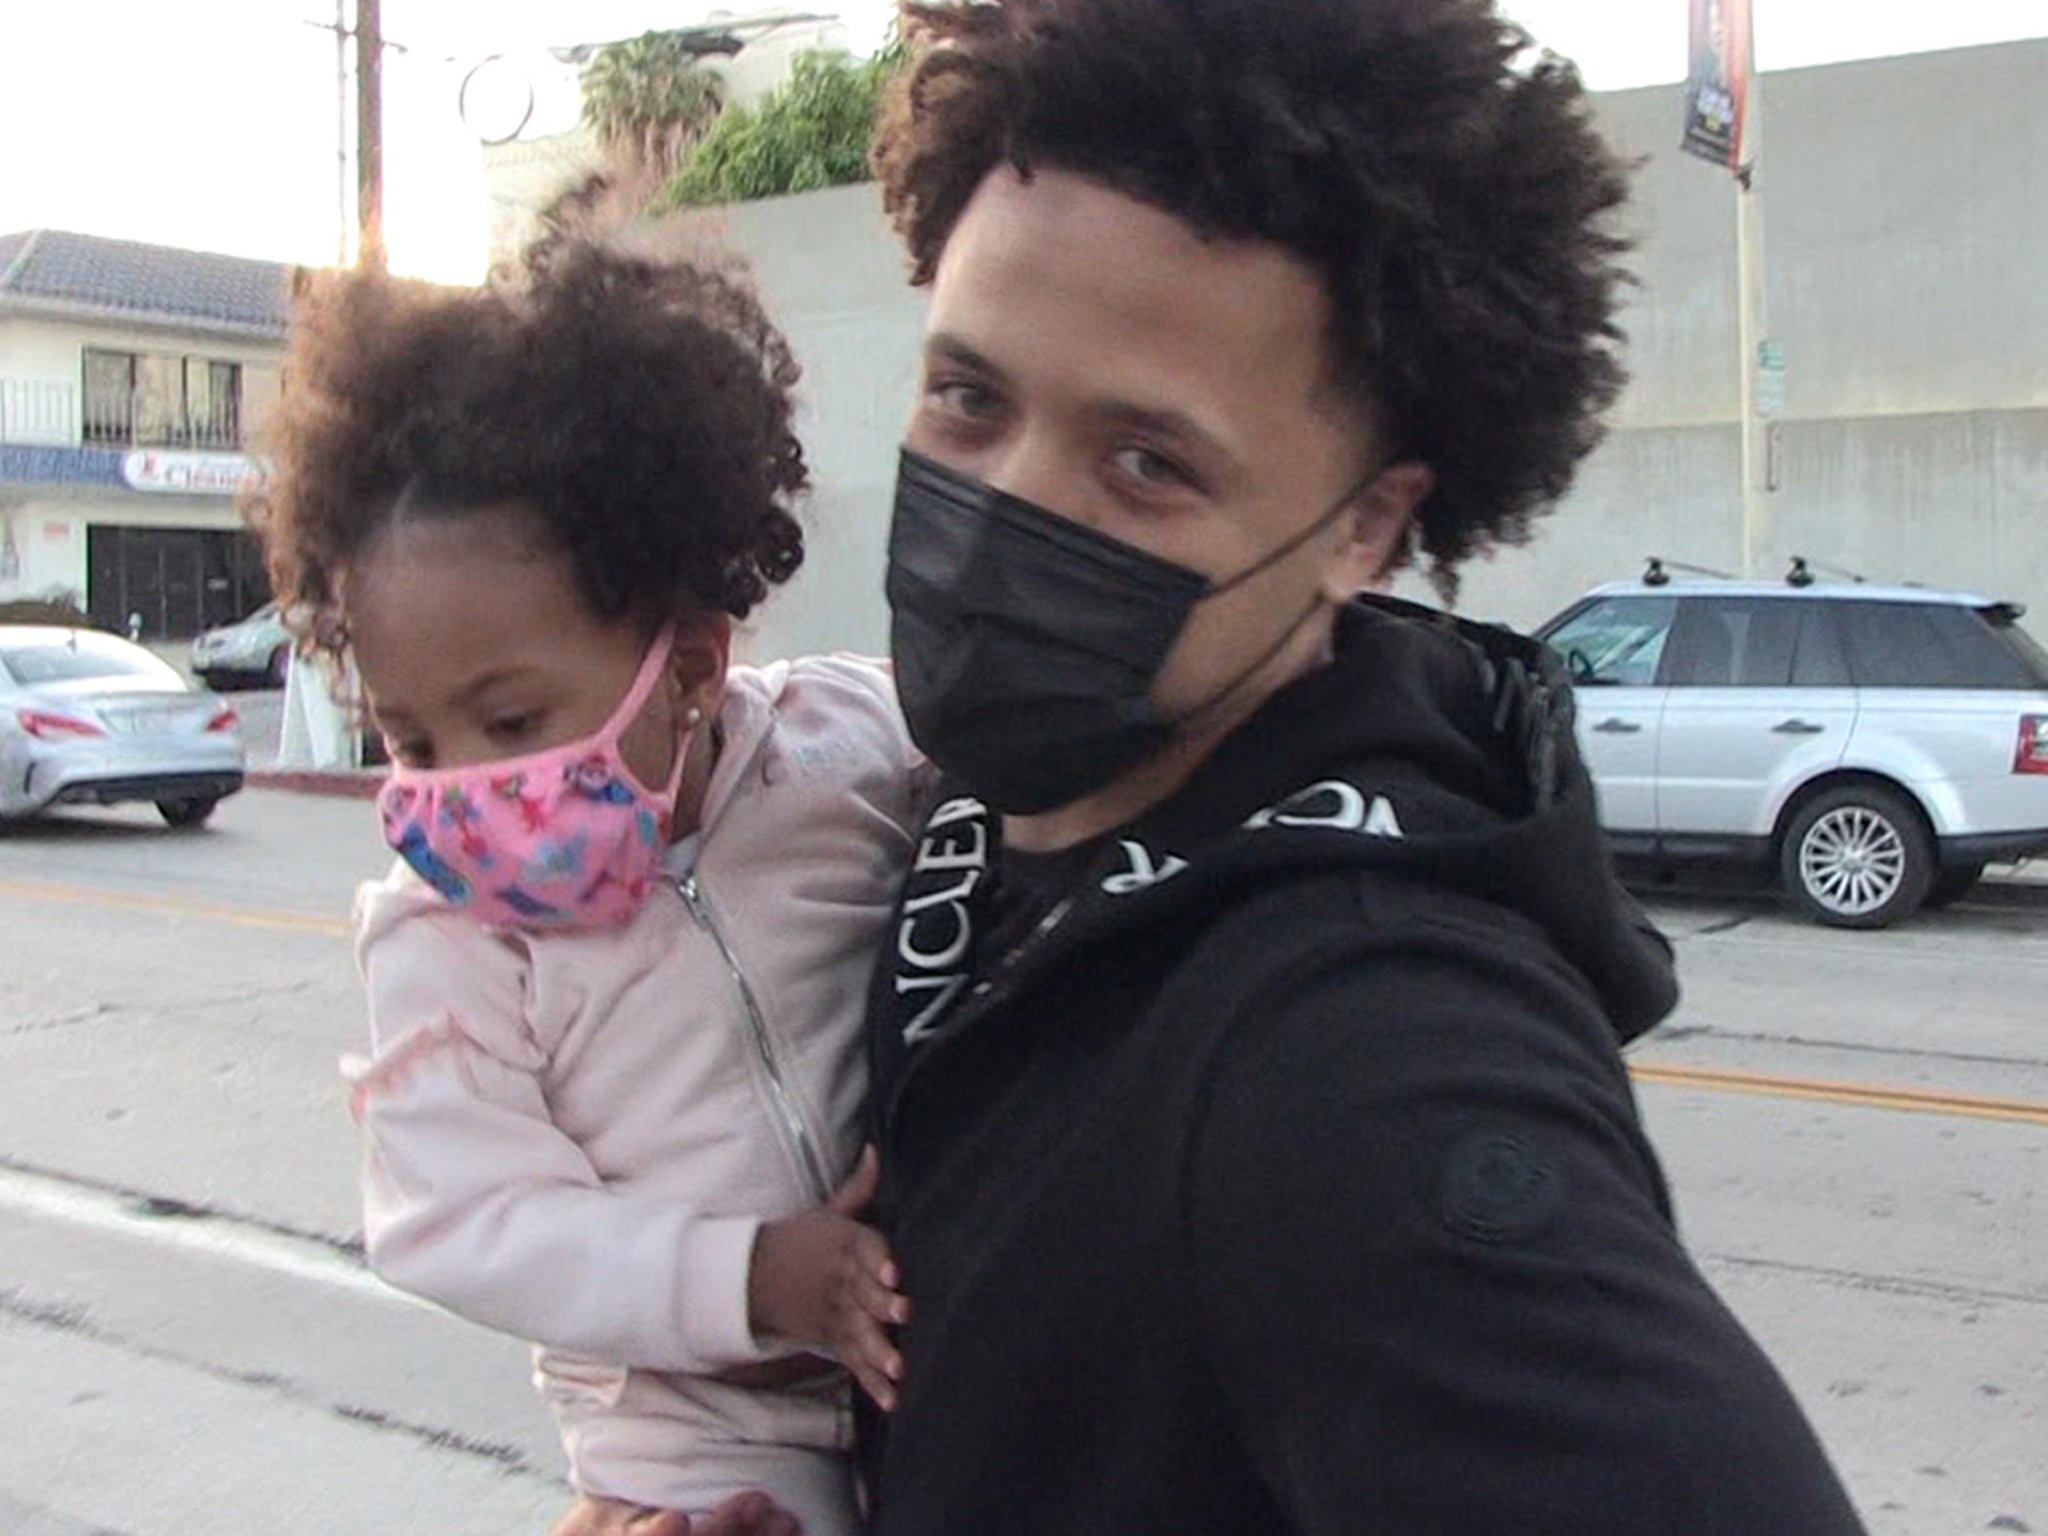 Future NBA #1 Pick Cade Cunningham Takes Daughter To Fancy L.A. Dinner